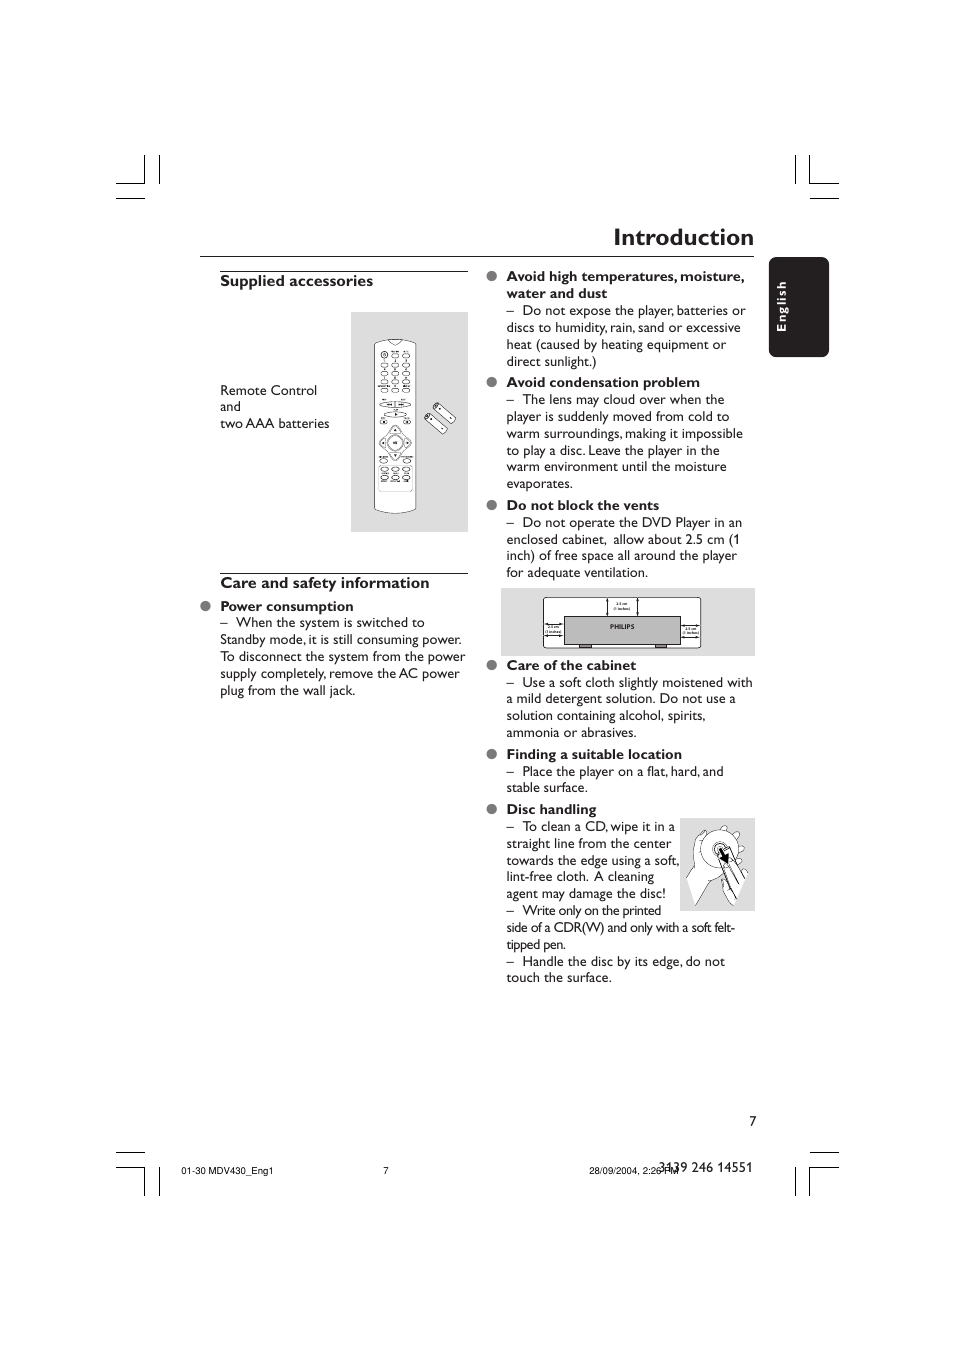 Introduction, Supplied accessories, Care and safety information | Philips Magnavox MDV430 User Manual | Page 7 / 30